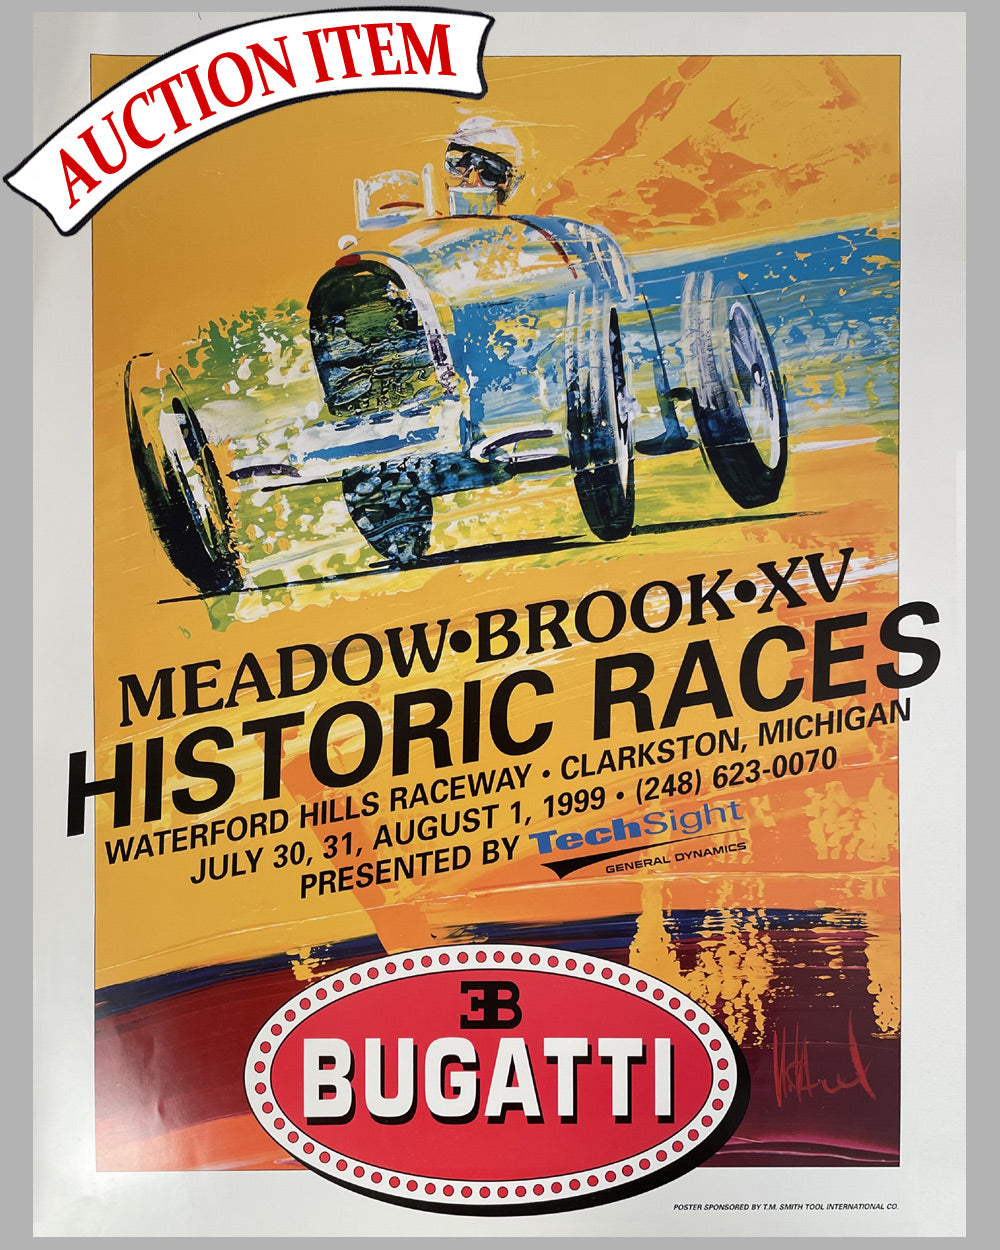 12 - 1999 Meadowbrook Historic Race official poster featuring Bugatti